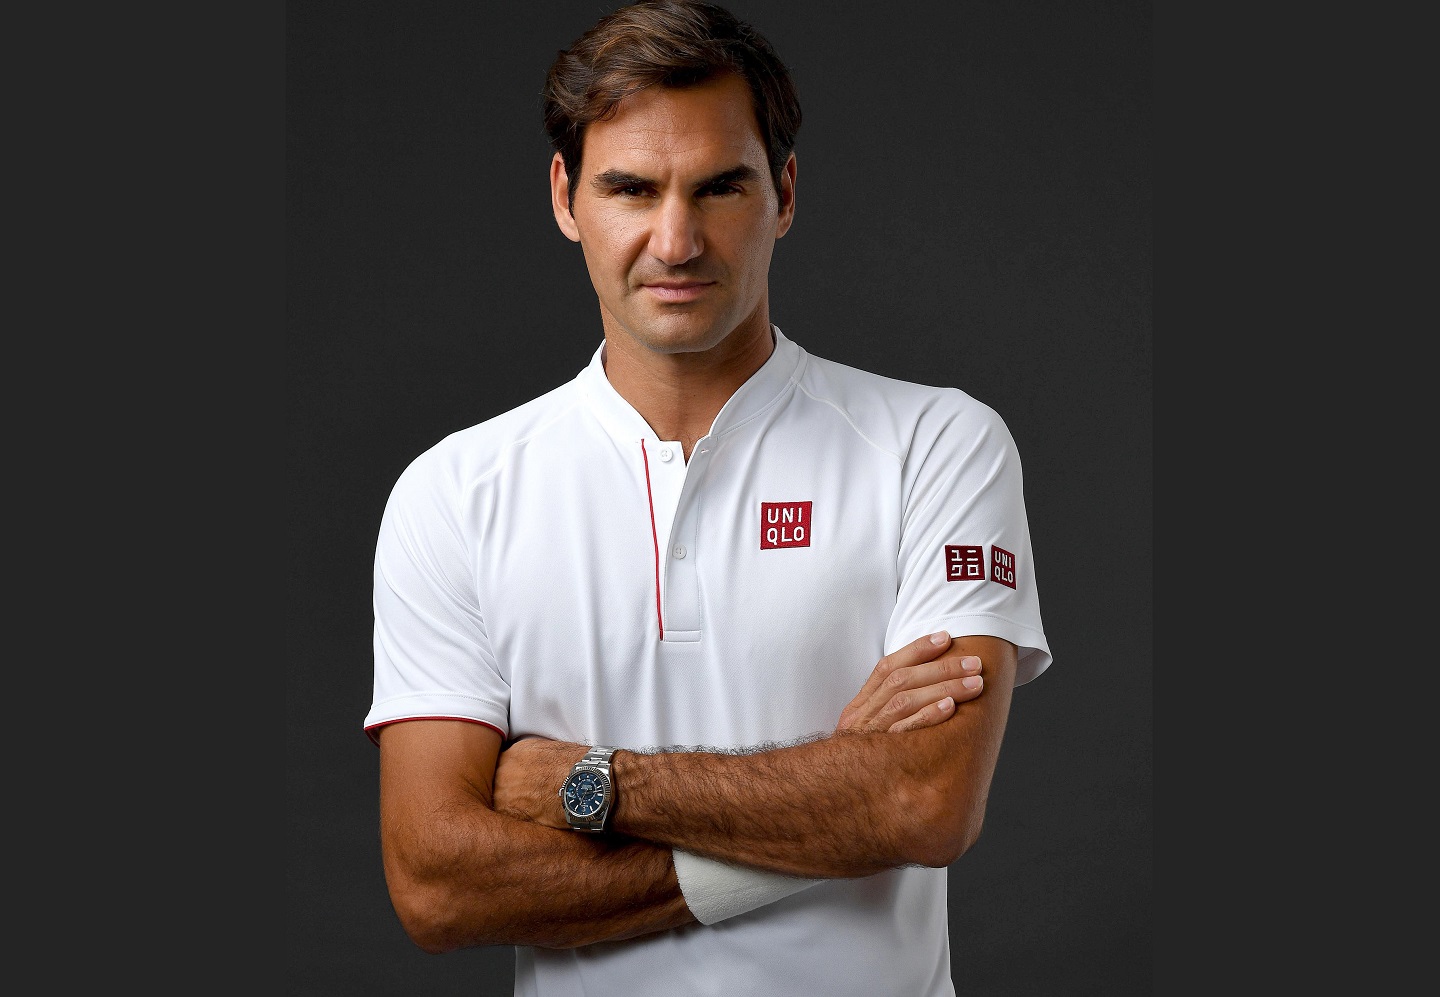 Roger Federer leaves Nike for Uniqlo | Options, The Edge1440 x 997